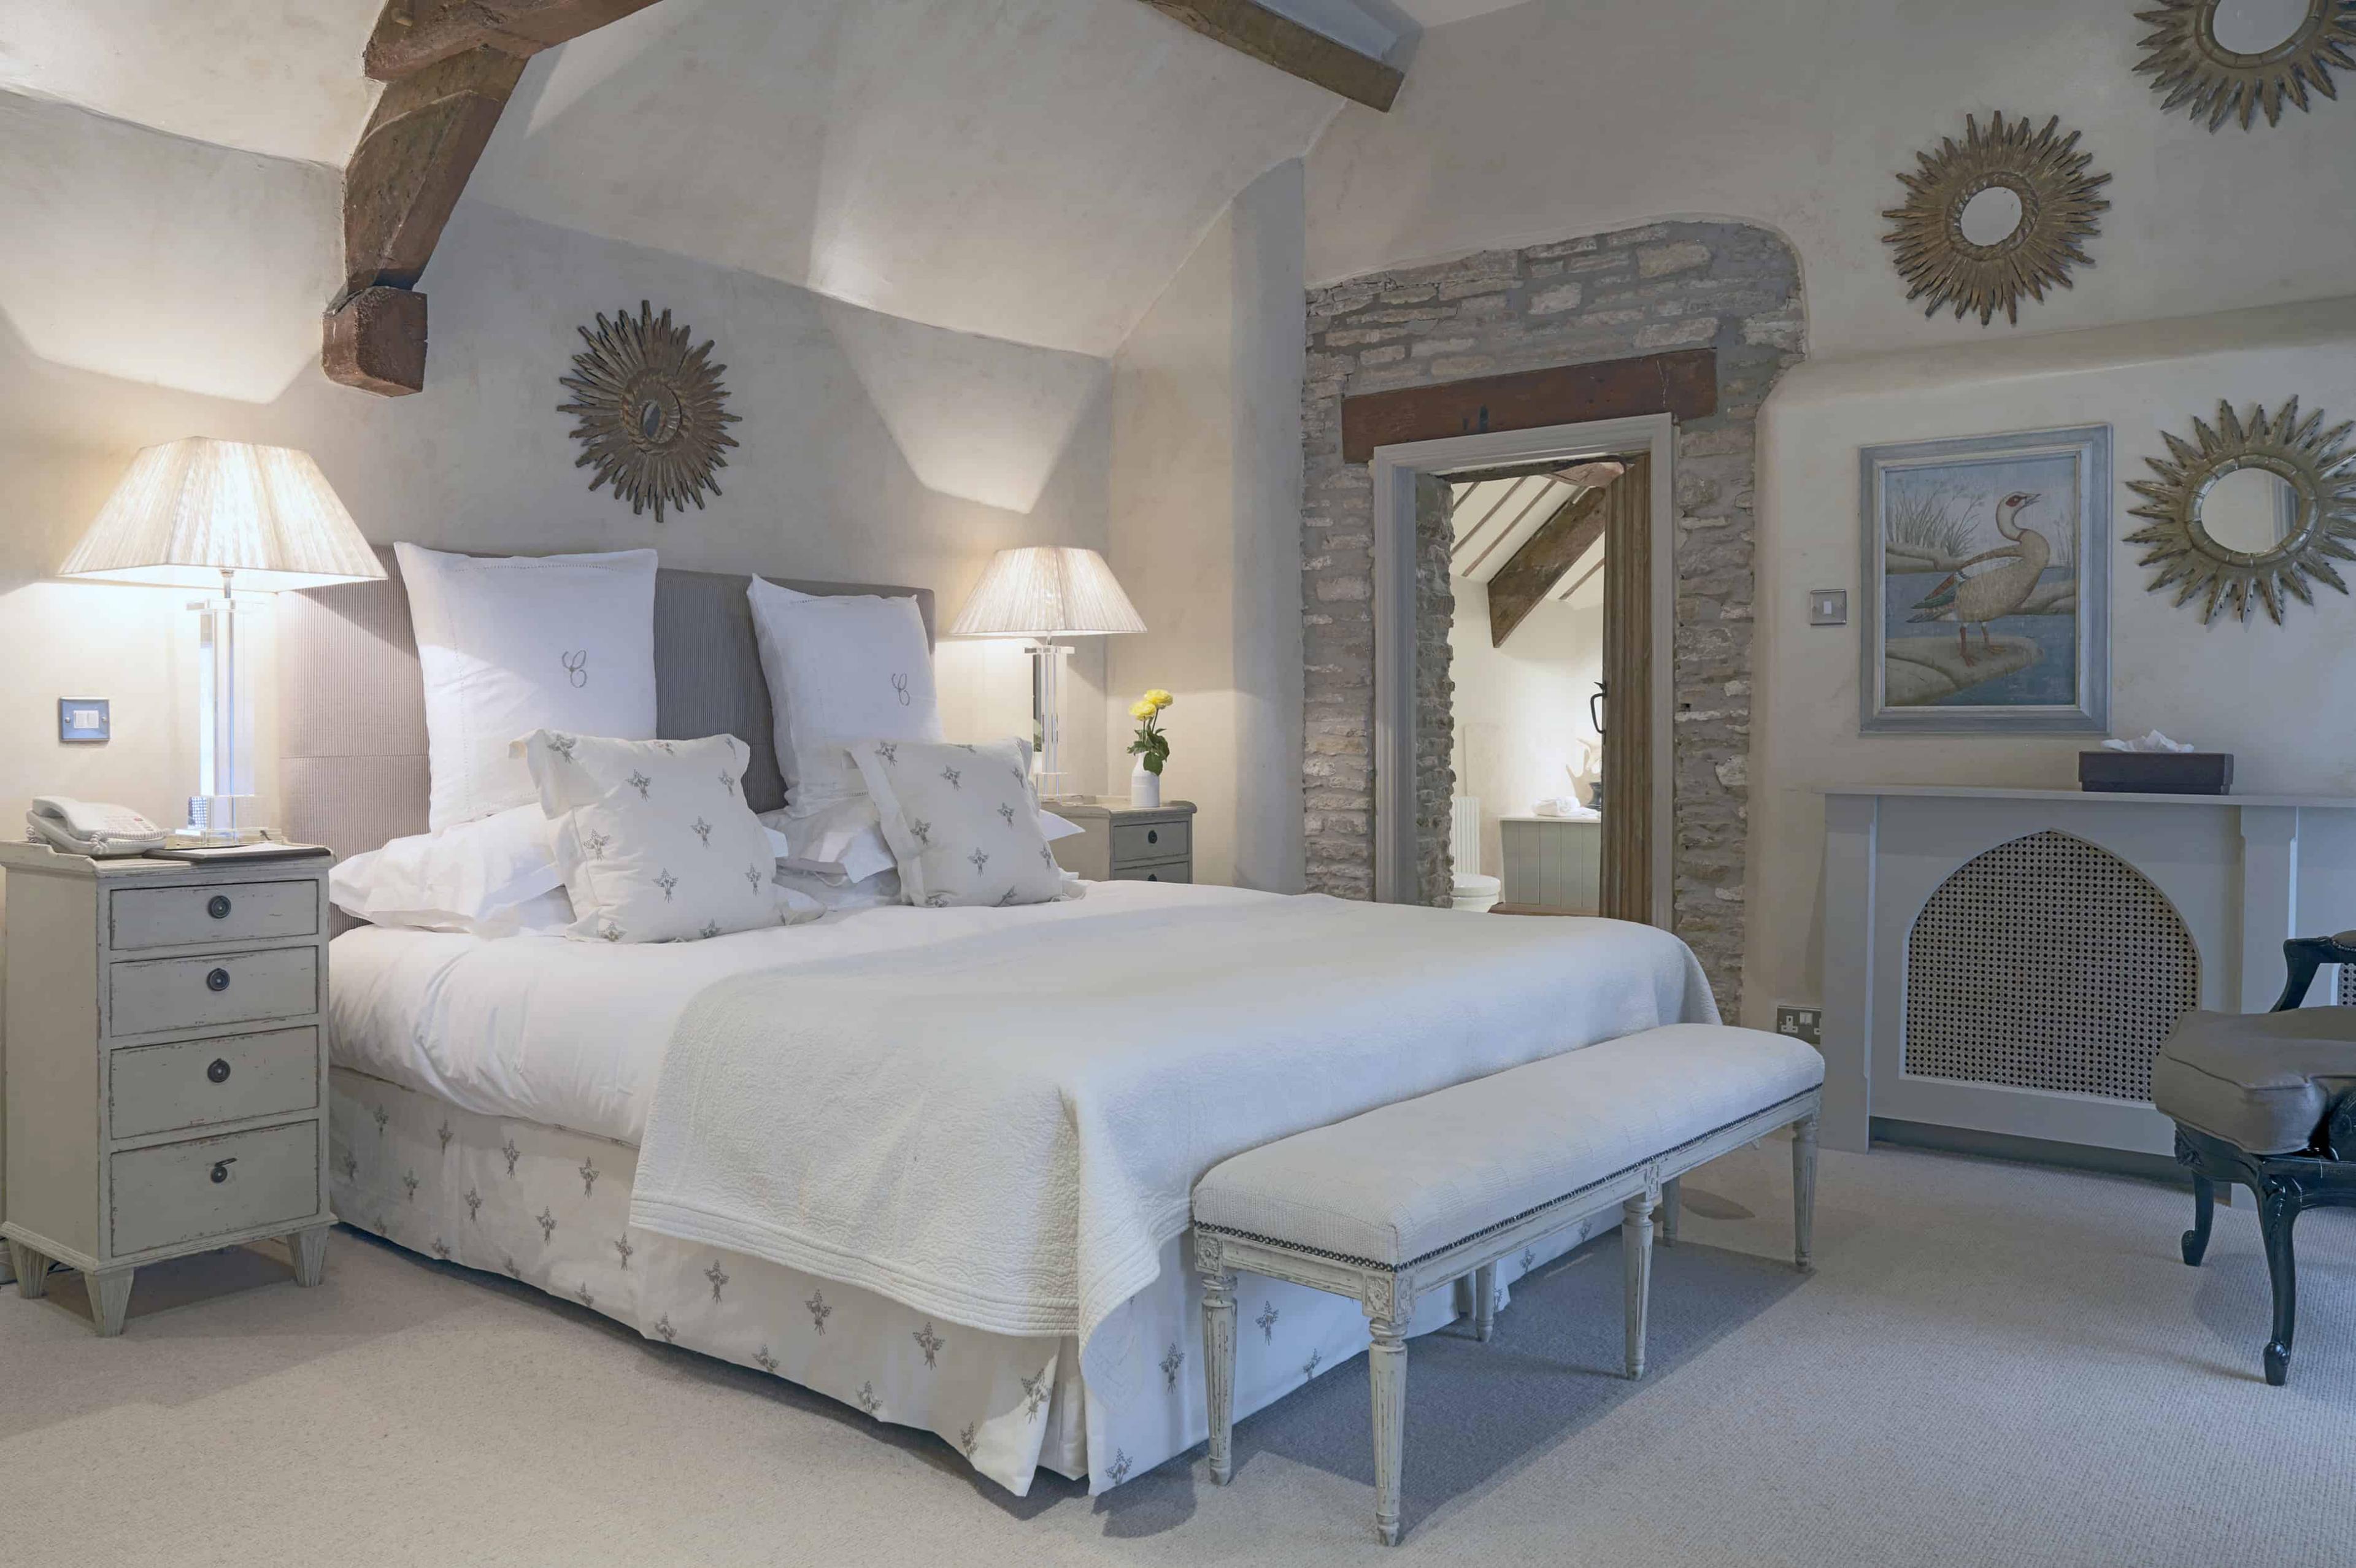 Bedroom at Calcot Manor, Cotswolds, England